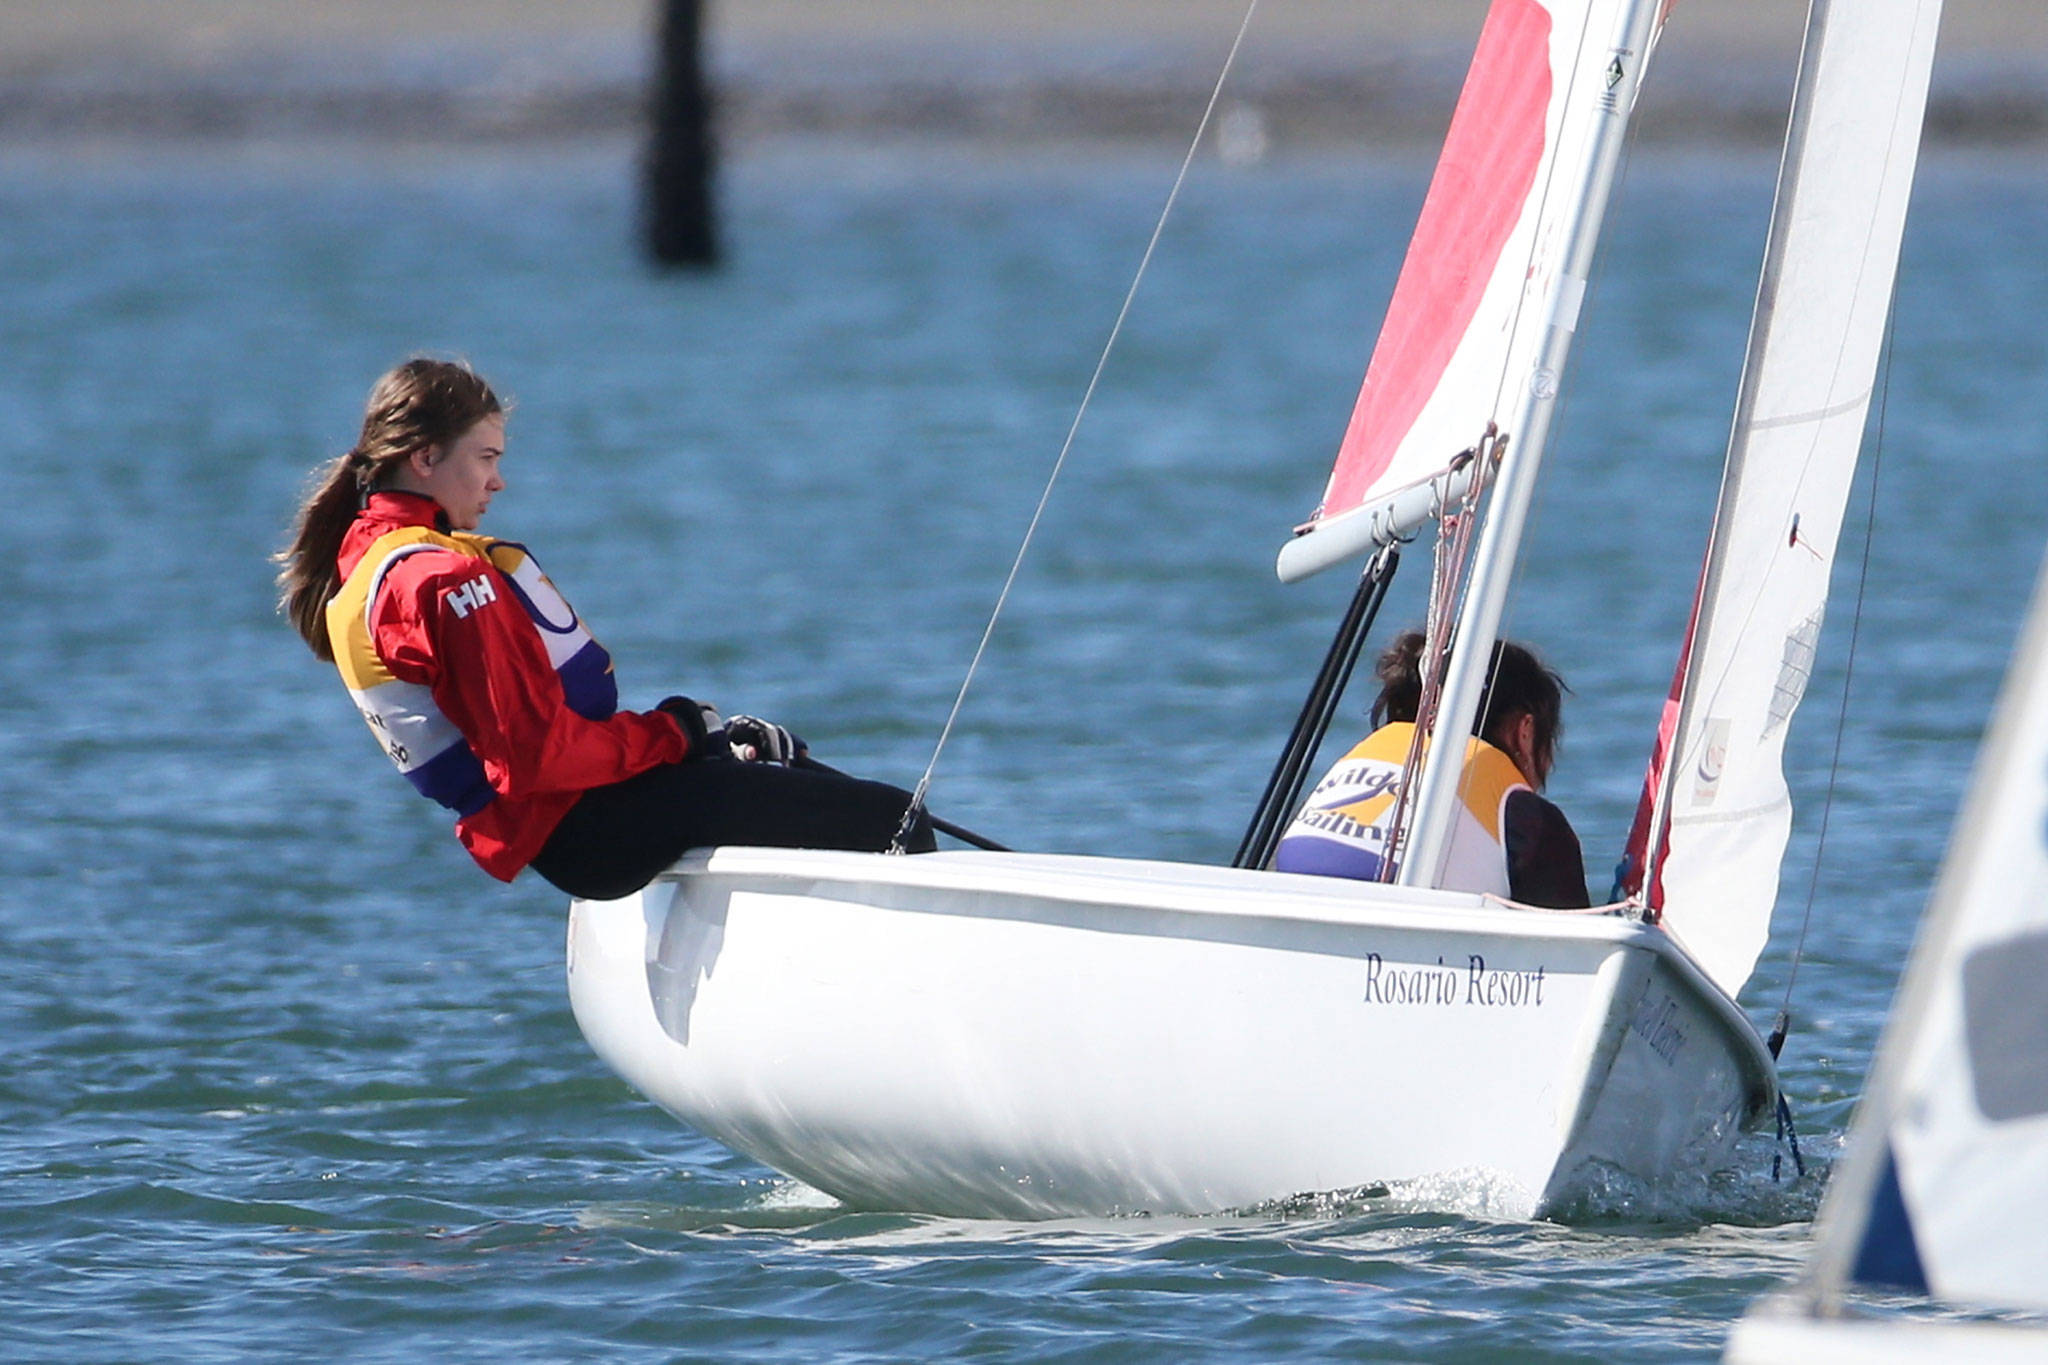 Jenny Danielson, left, and Catherine Wicker compete for the Wildcat sailing team last weekend. (Photo by John Fisken)